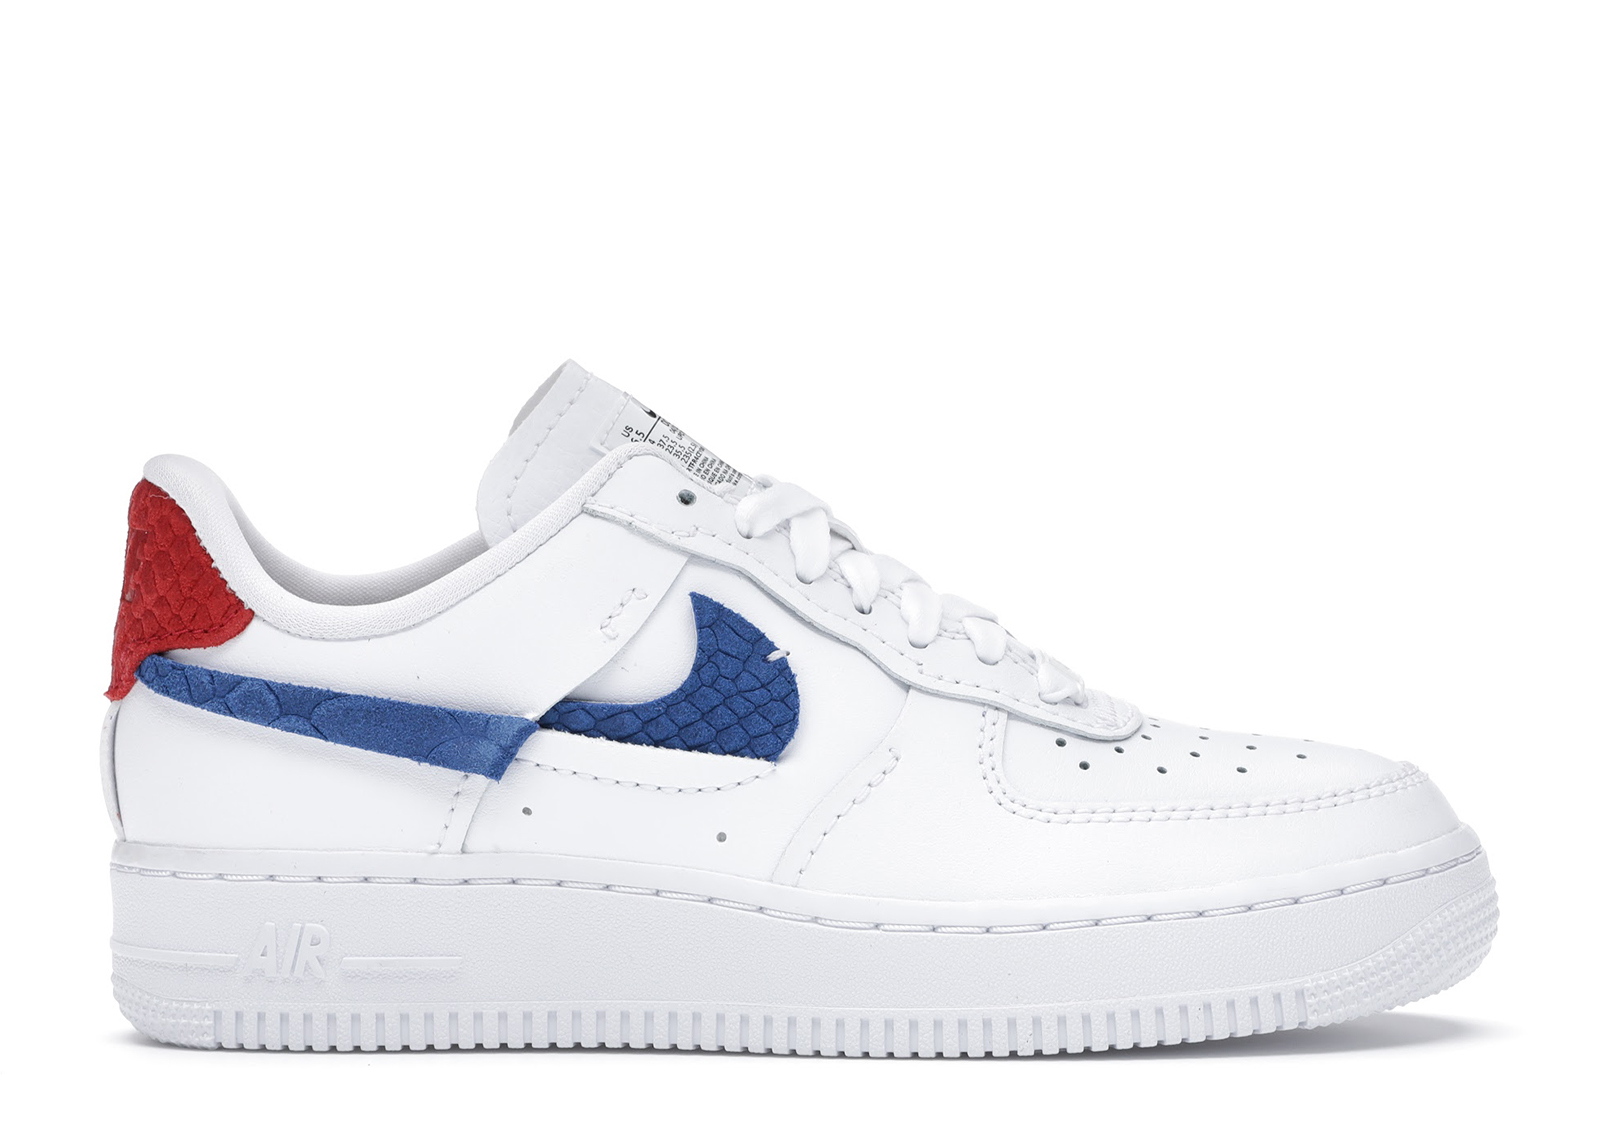 Nike Air Force 1 LXX White Red Royal (Women's) - DC1164-100 - US